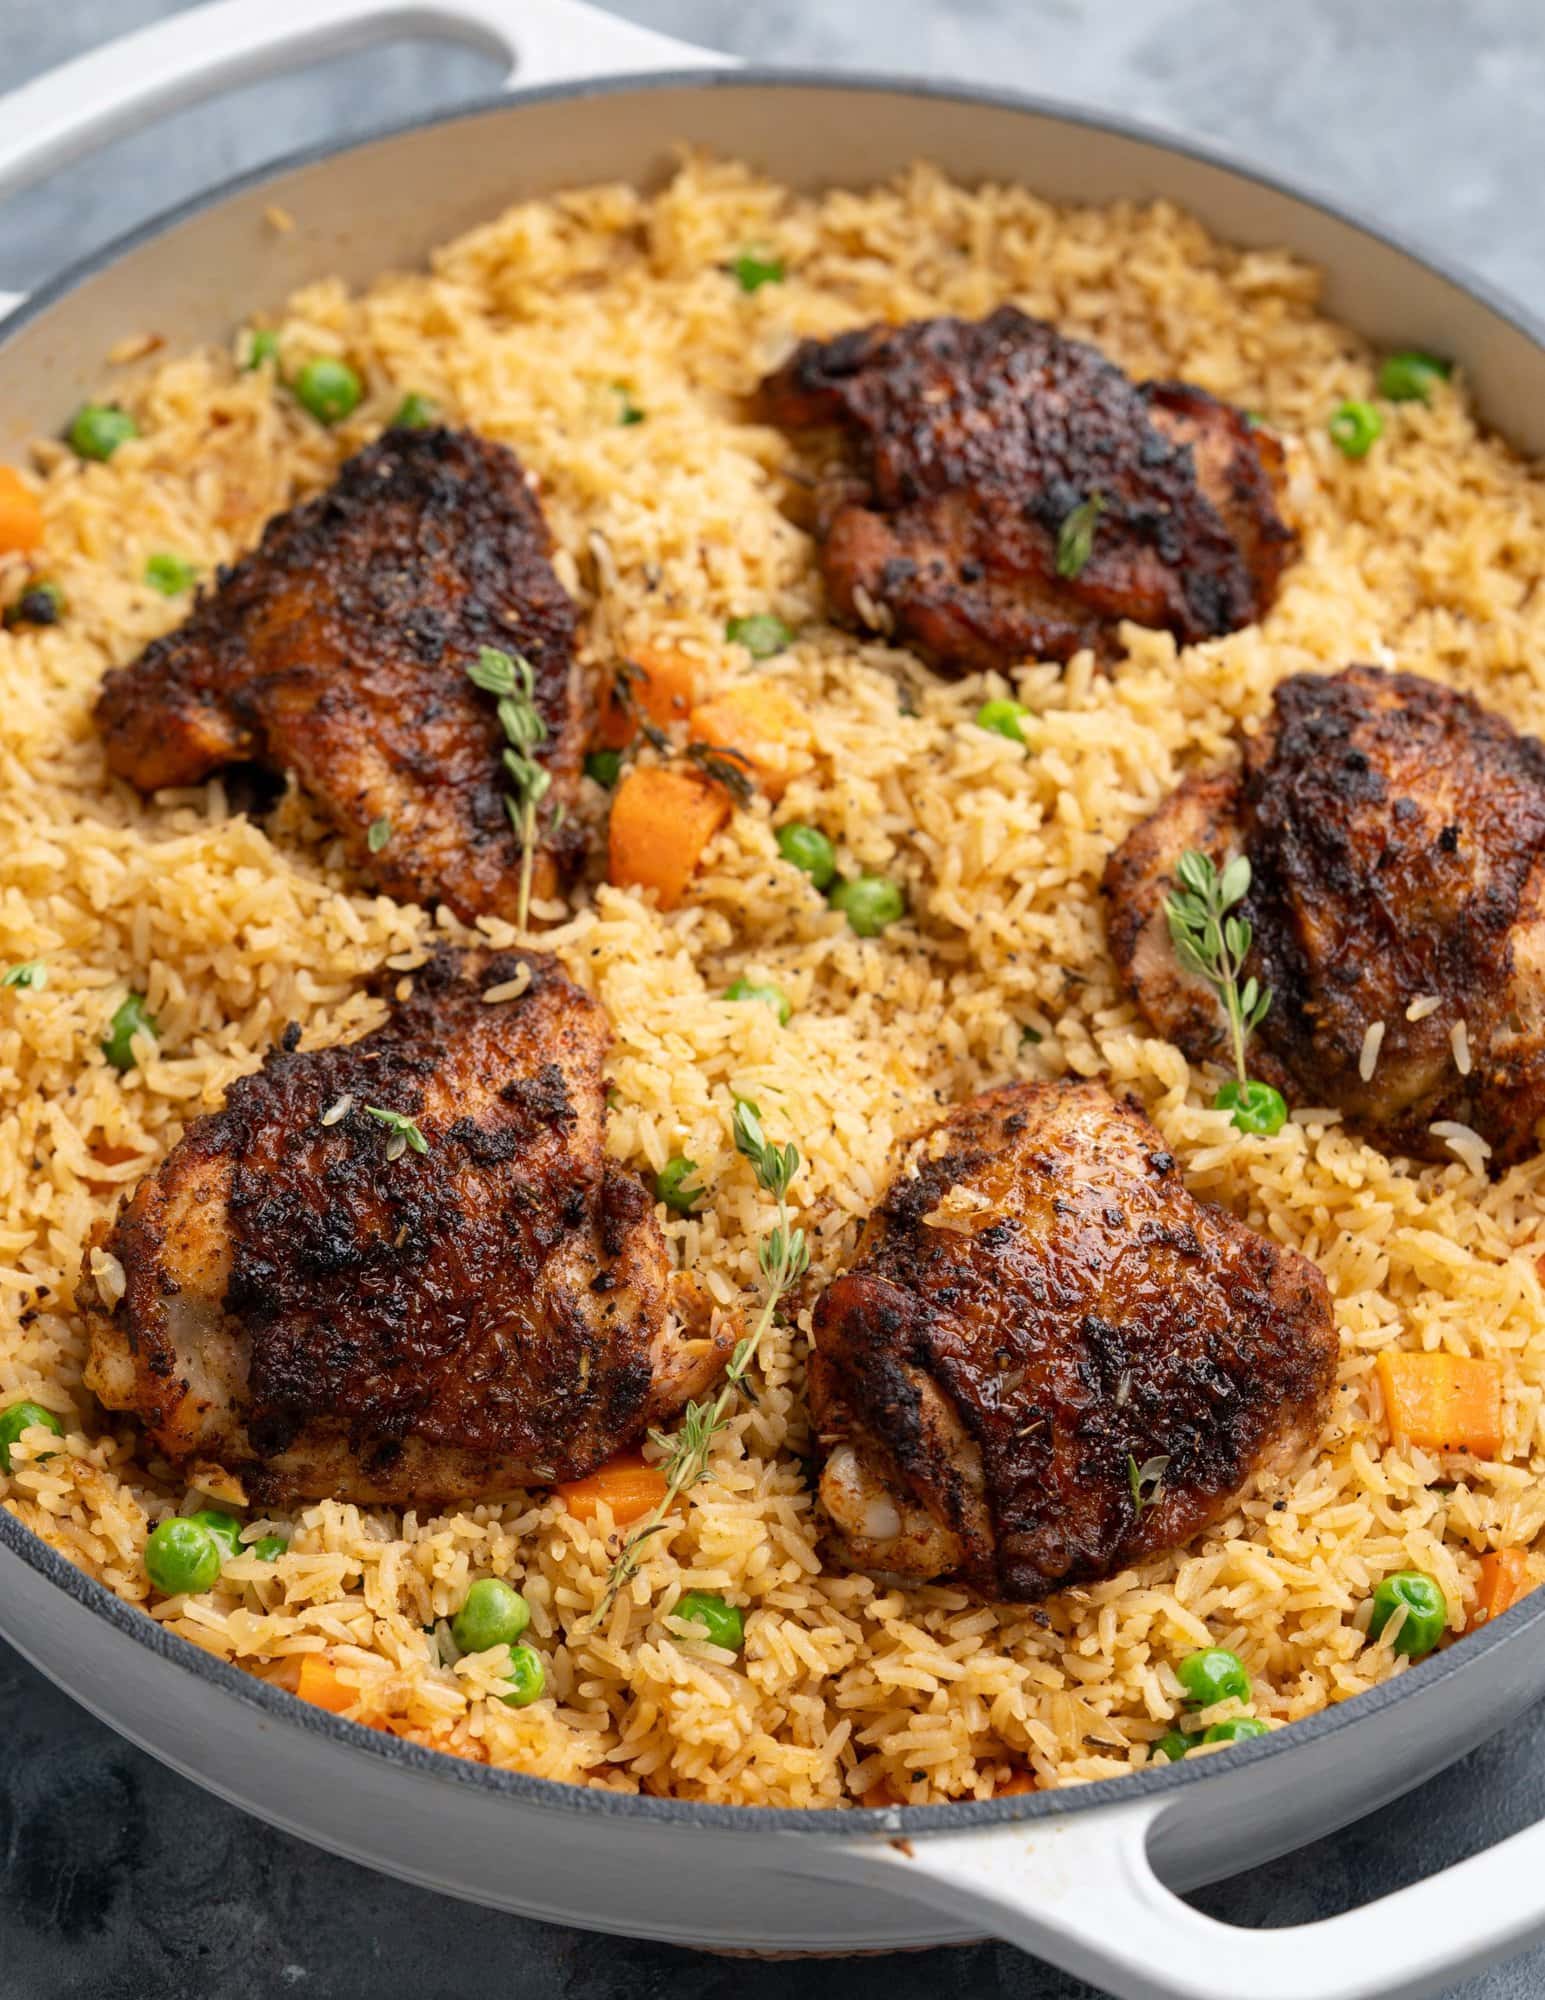 Image shows crispy chicken thighs, flavored rice , cooked carrots and peas, baked in a Dutch oven